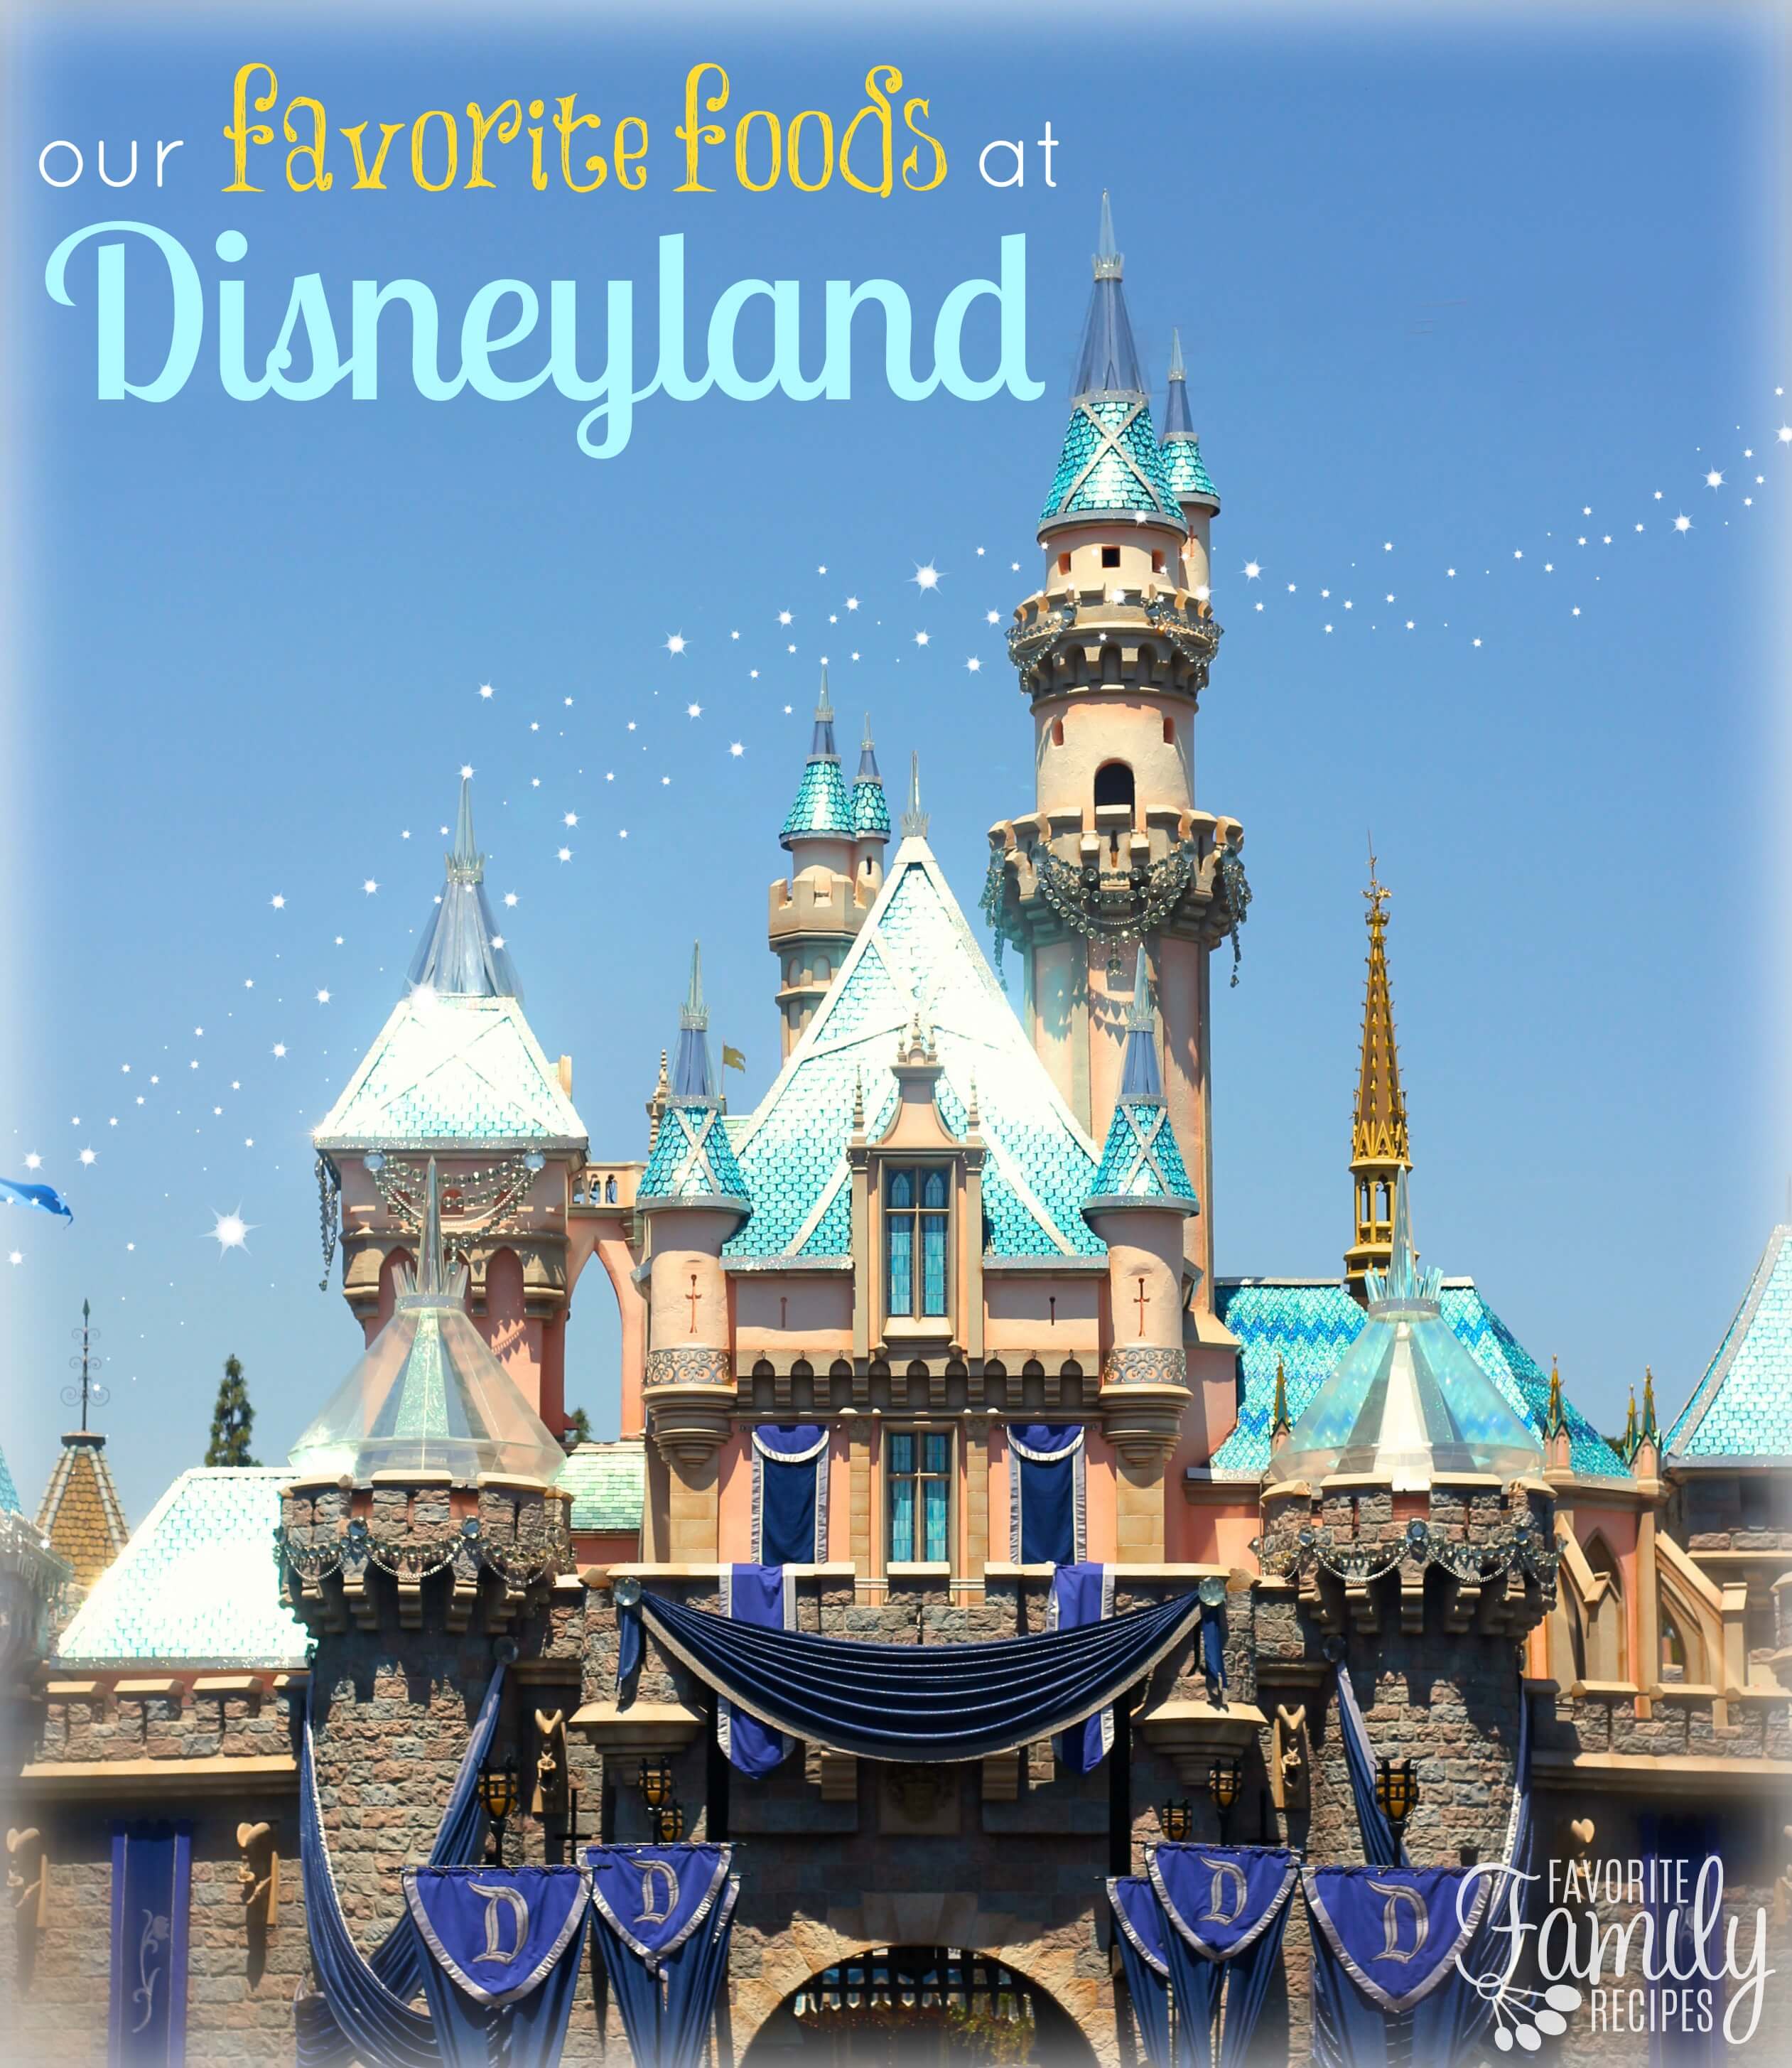 Our Favorite Foods at Disneyland | Favorite Family Recipes